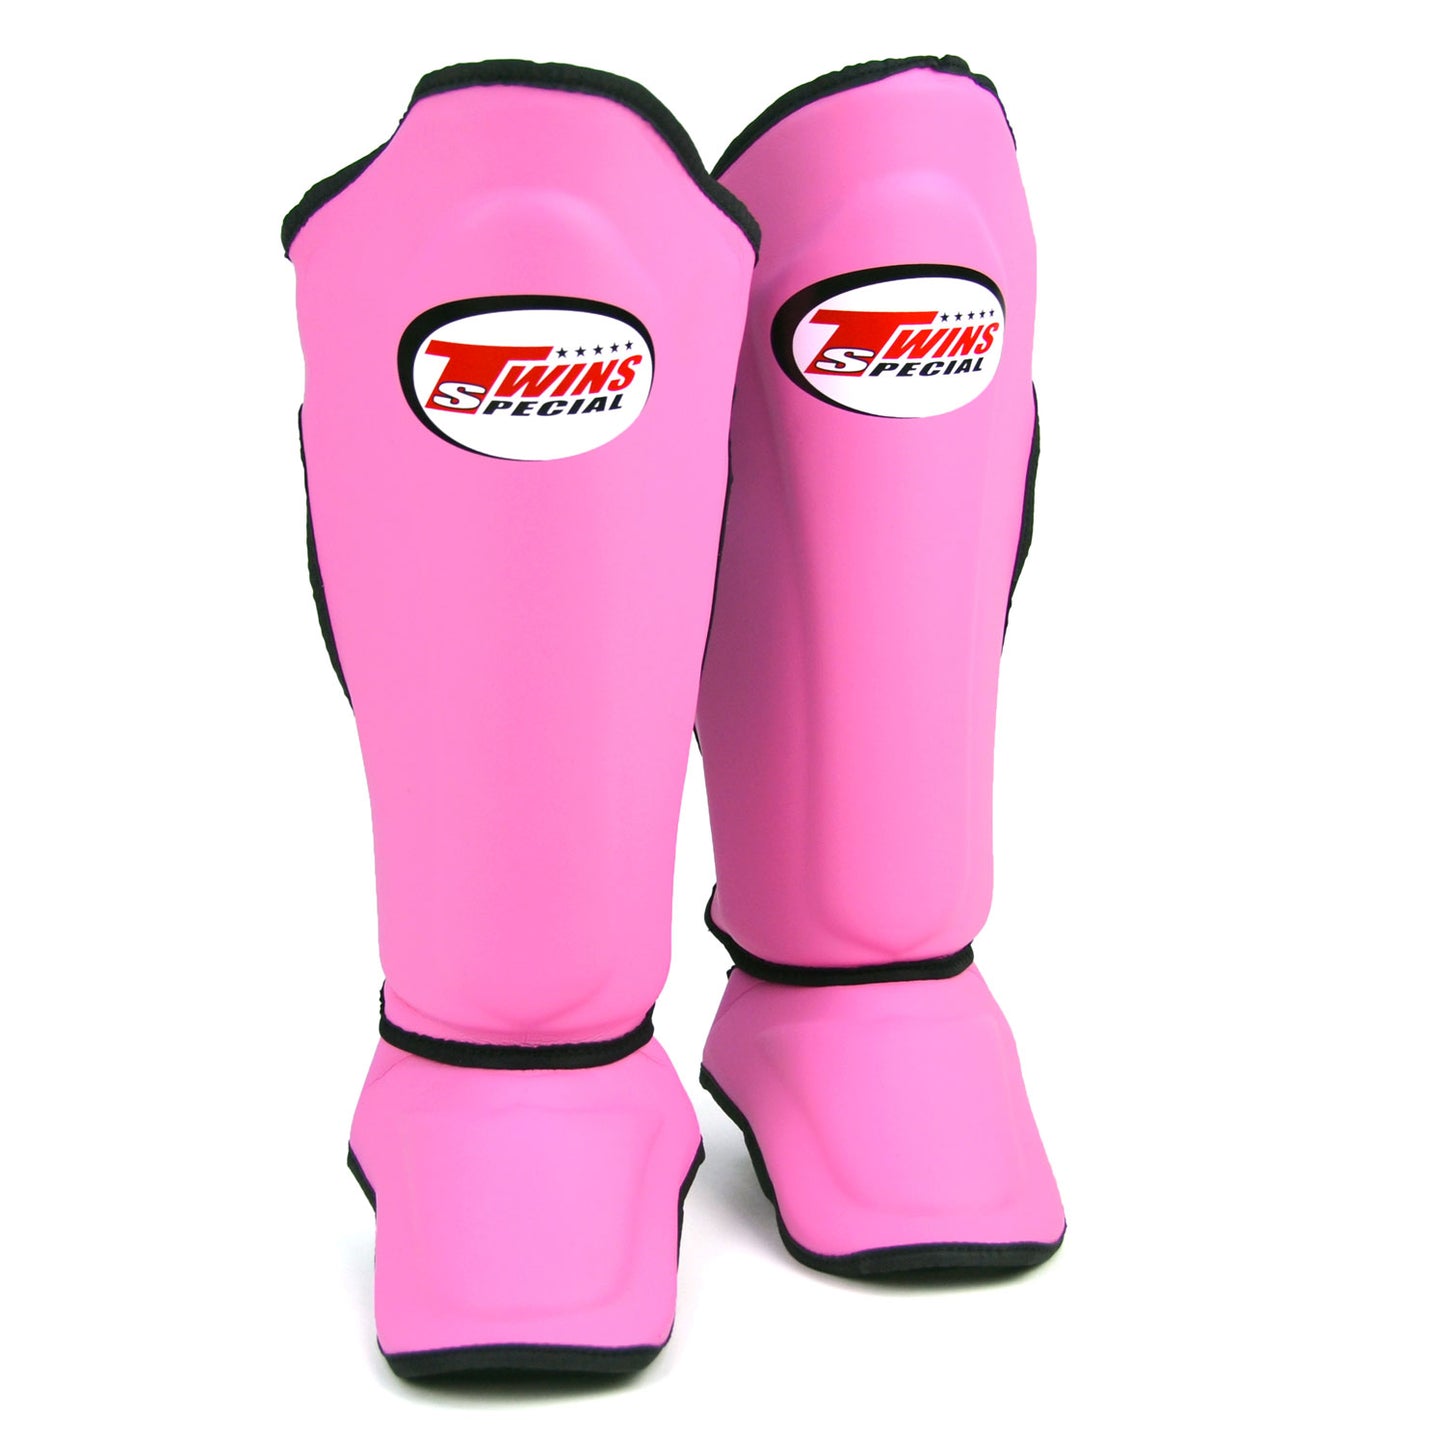 TWINS SGS10 DOUBLE PADDED SHIN GUARDS